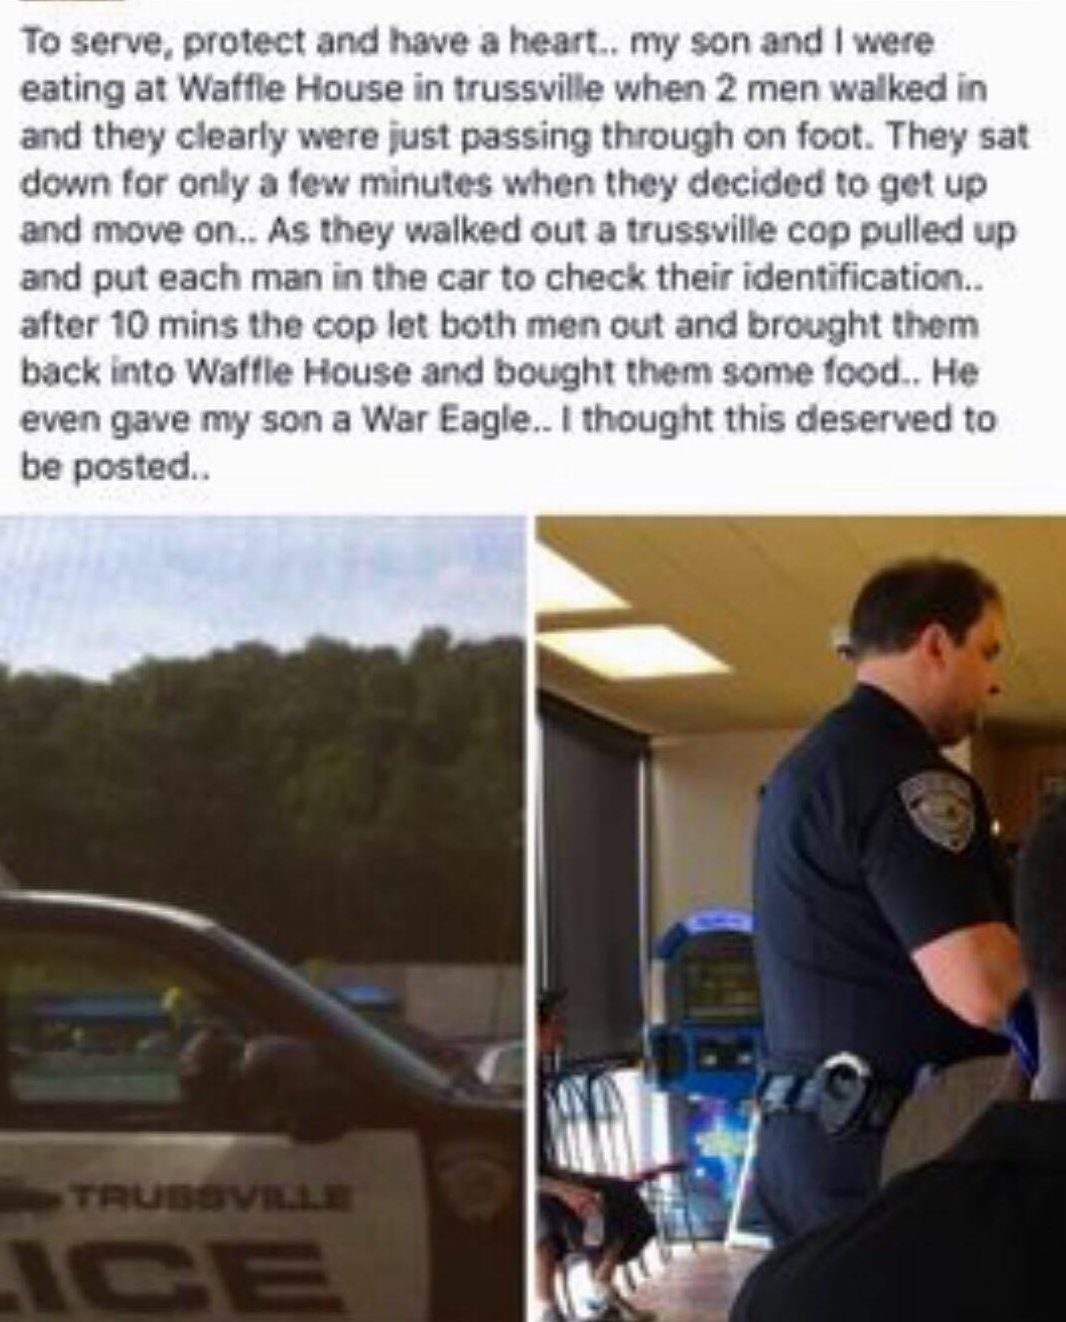 Trussville police officer extends help, food to people passing through